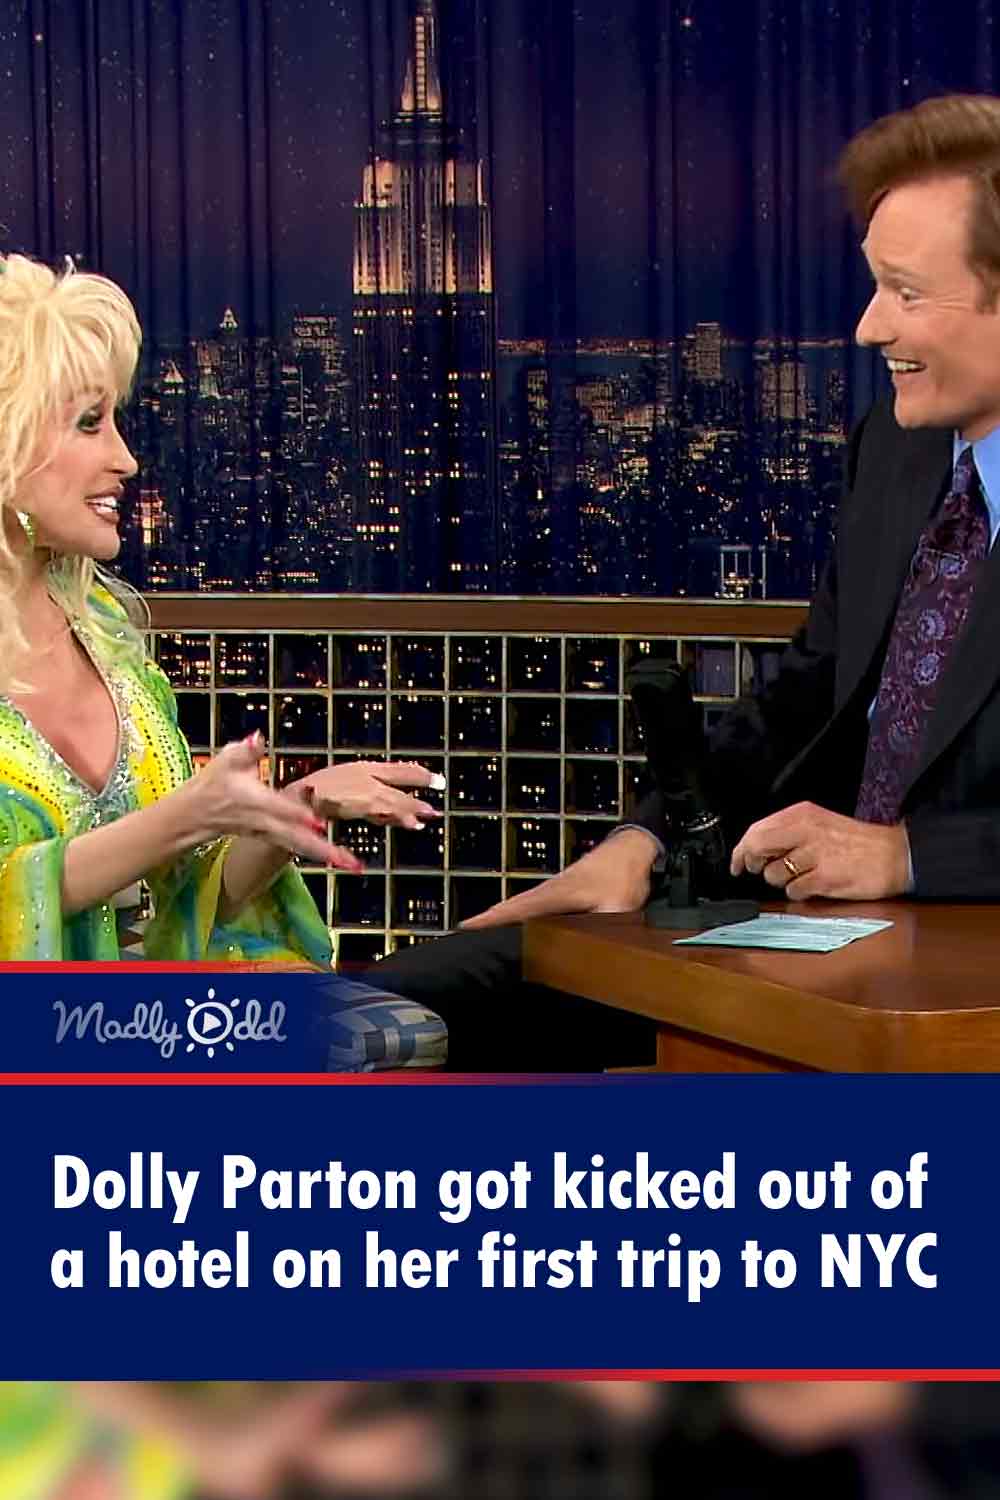 Dolly Parton got kicked out of a hotel on her first trip to NYC